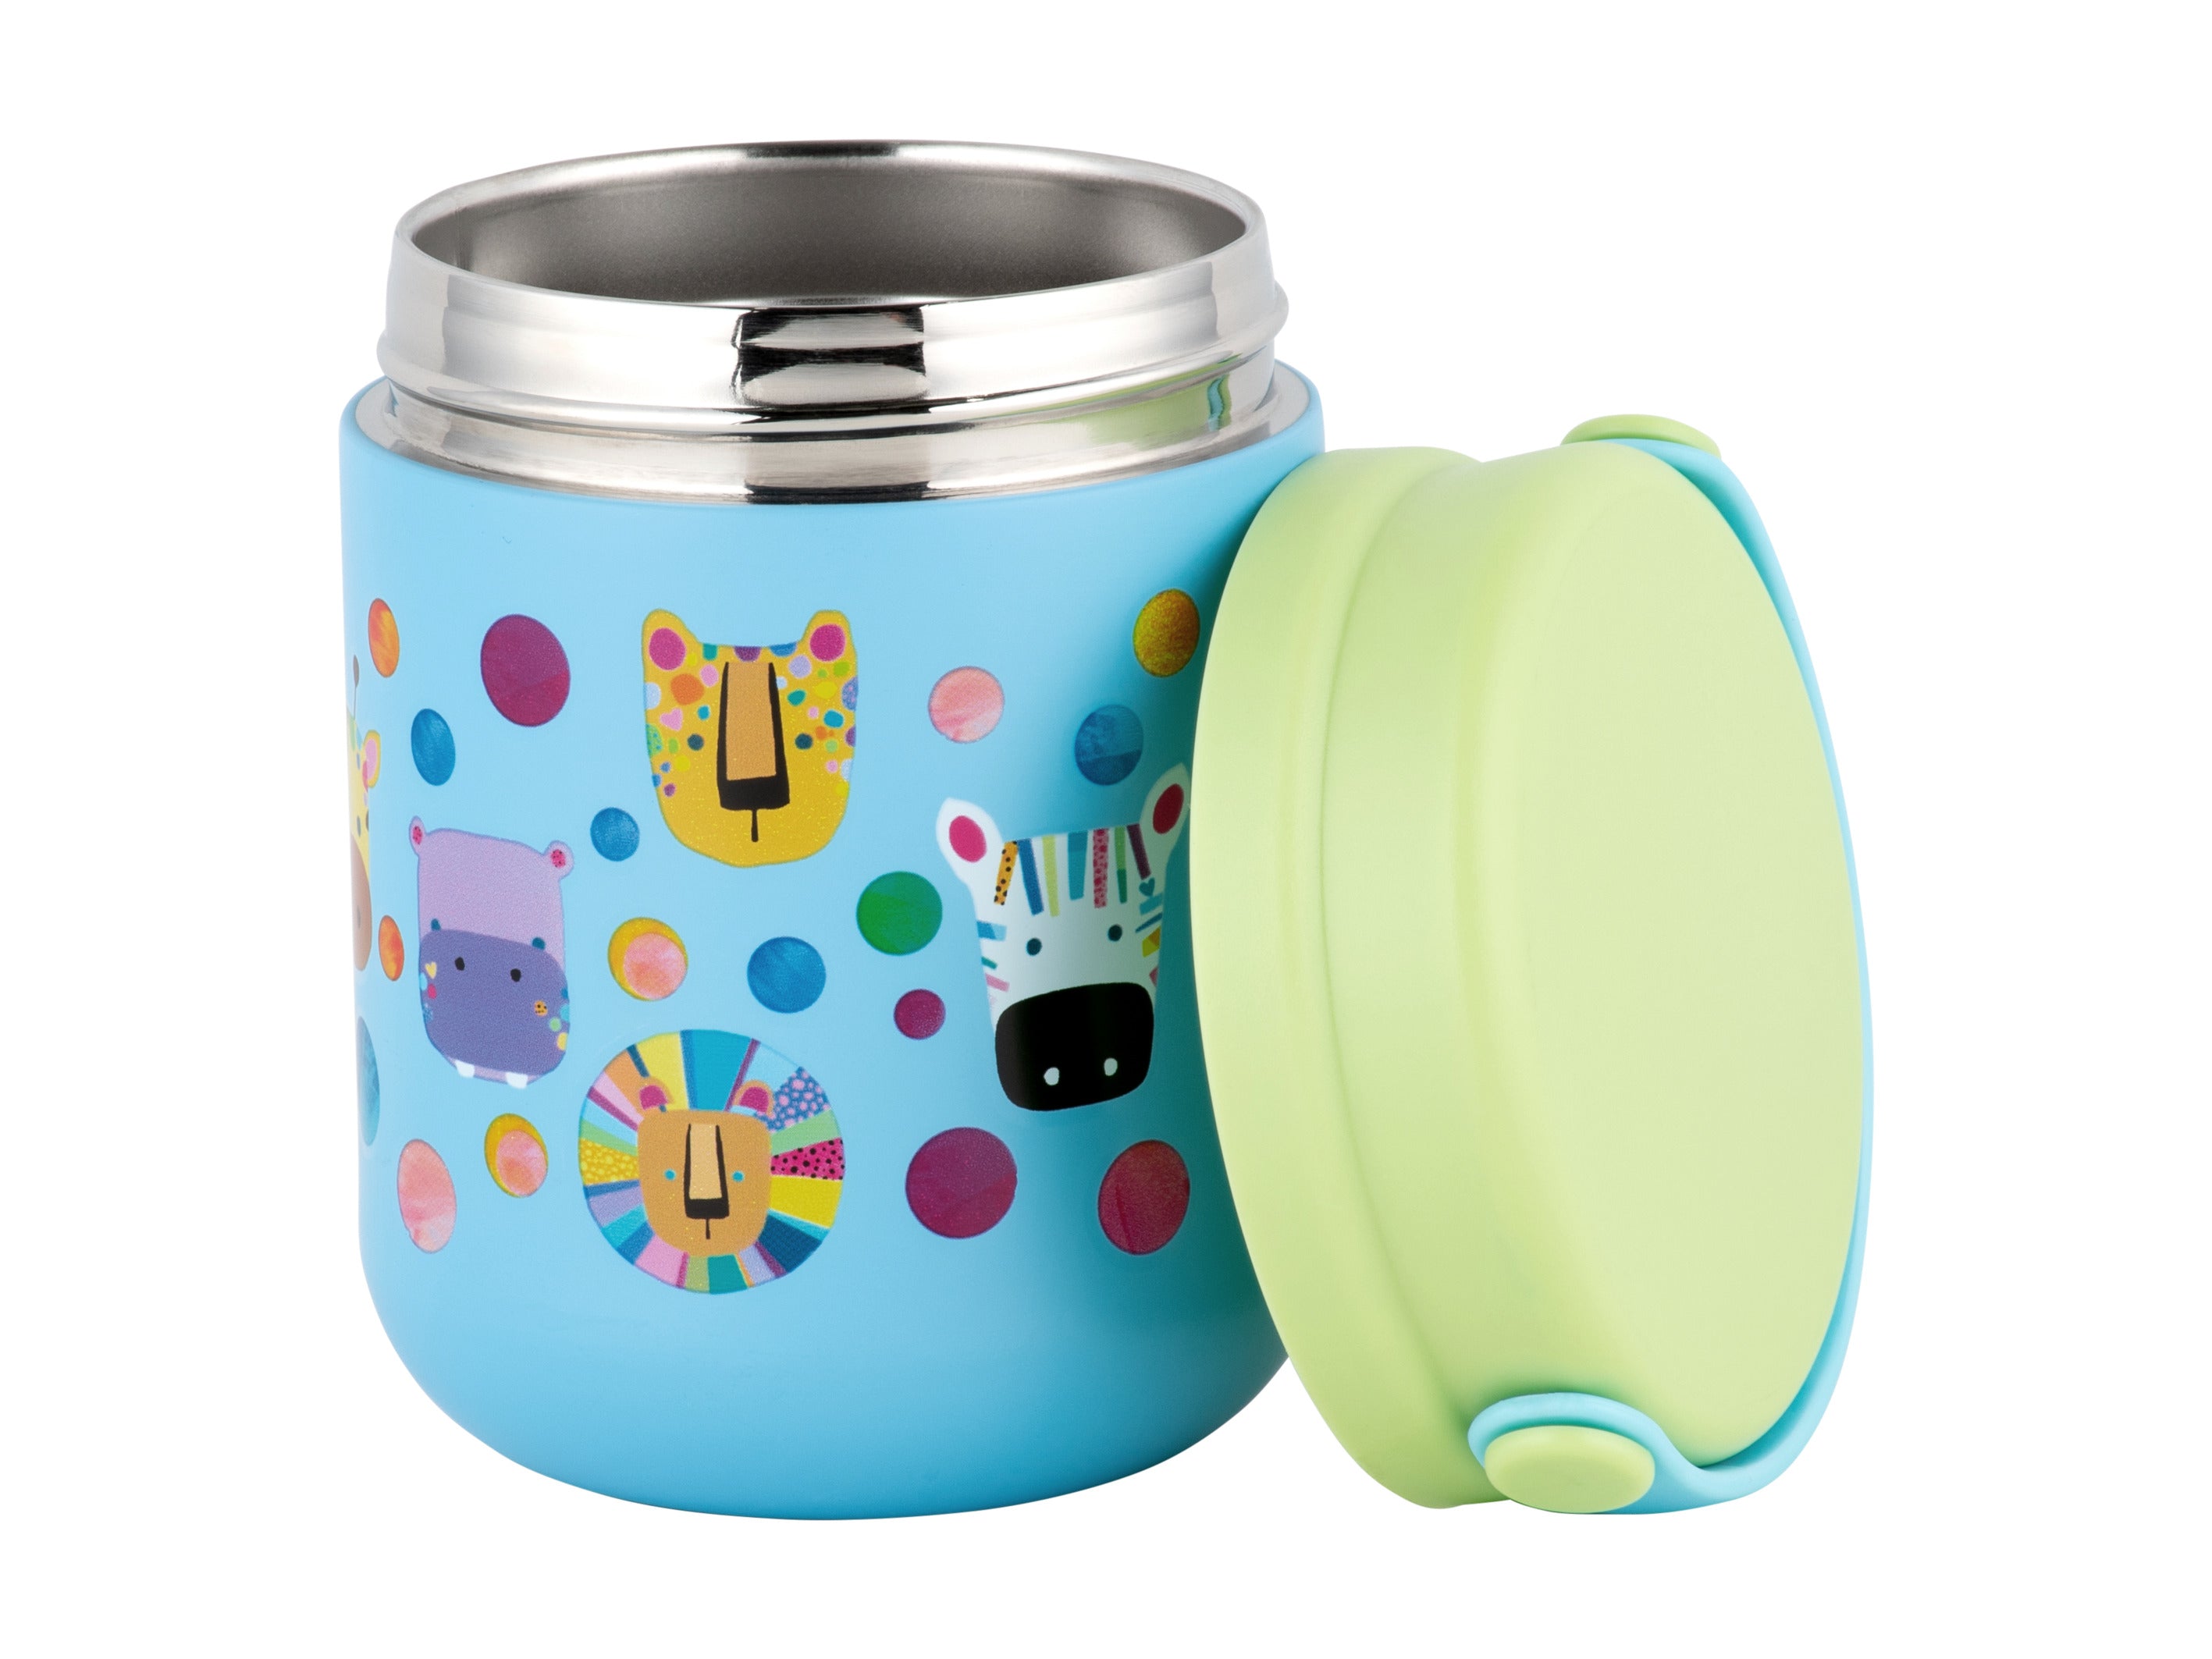 Maxwell & Williams Kasey Rainbow Critters Child Insulated Food Container 300ml - Blue